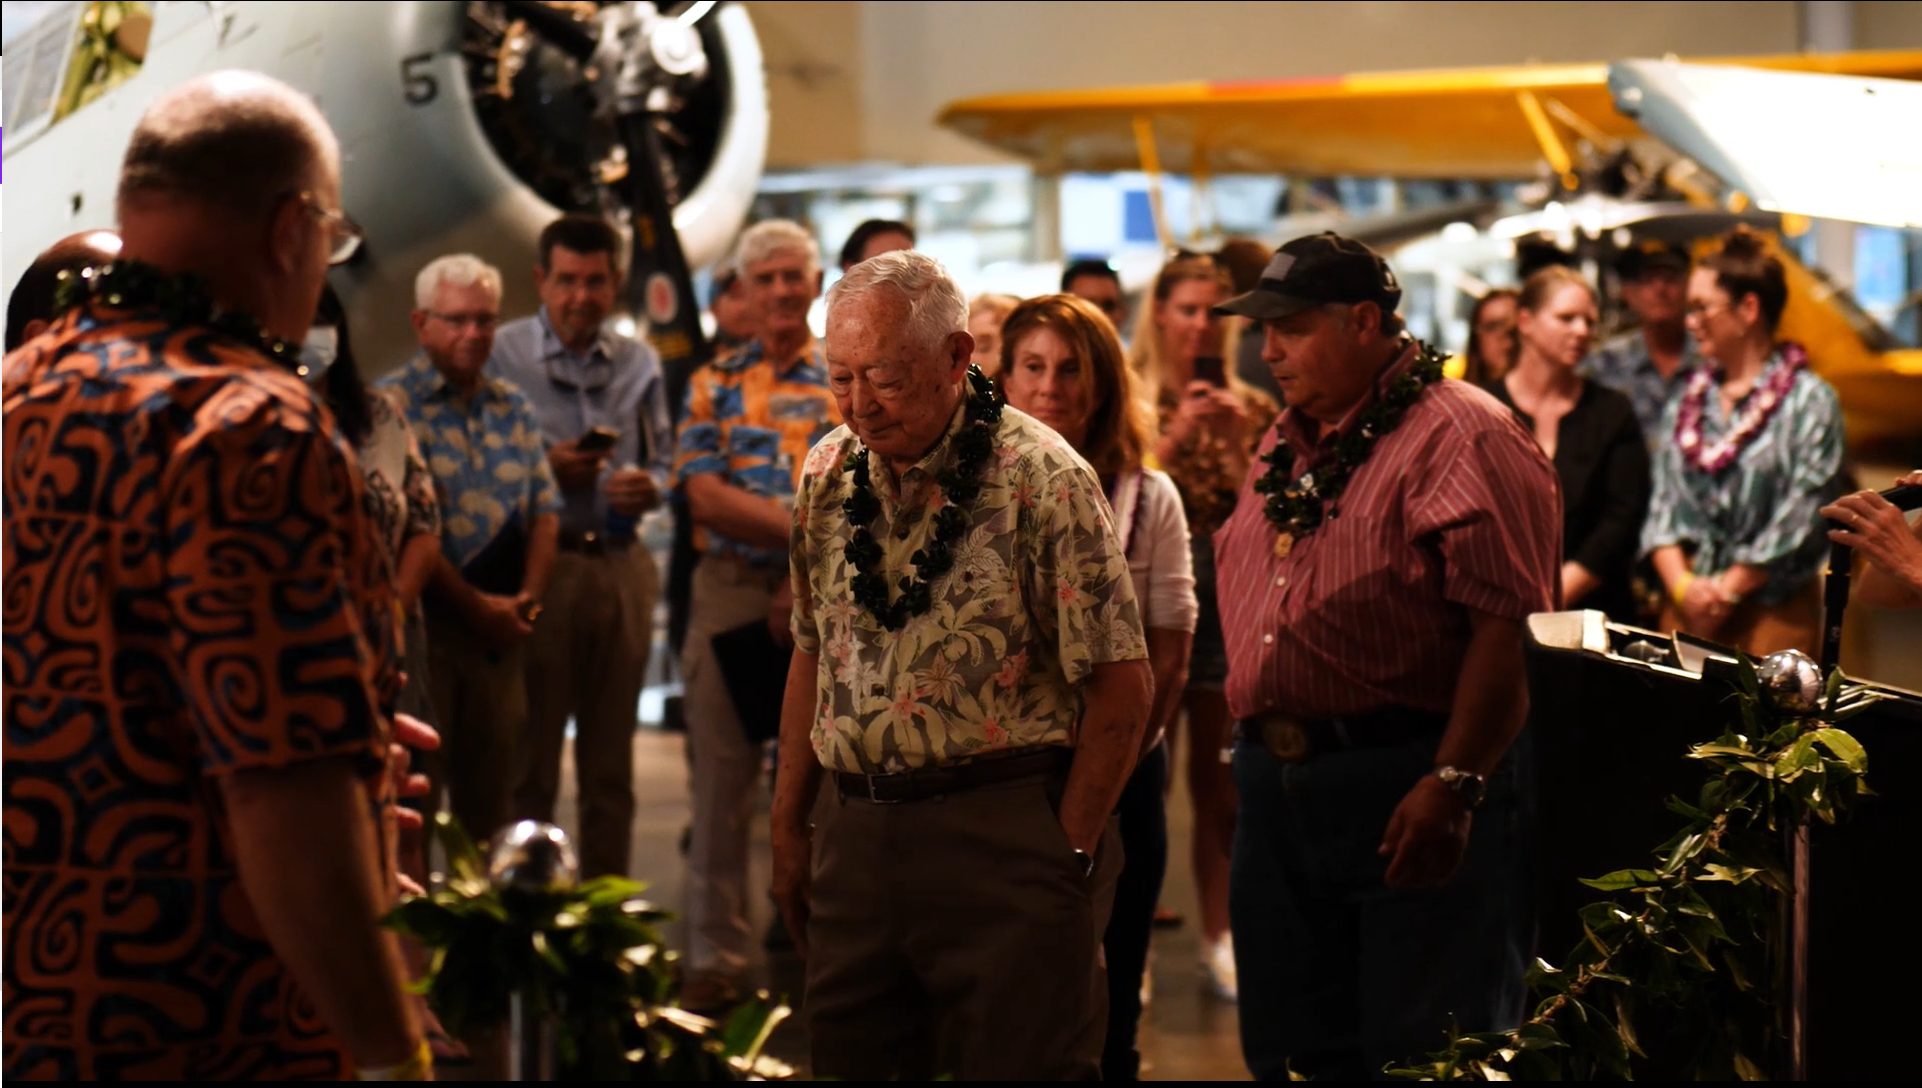 Photograph of a traditional Hawaiian blessing at opening day of new PHAM exhibit called "Unveiling Maui in Wartime".